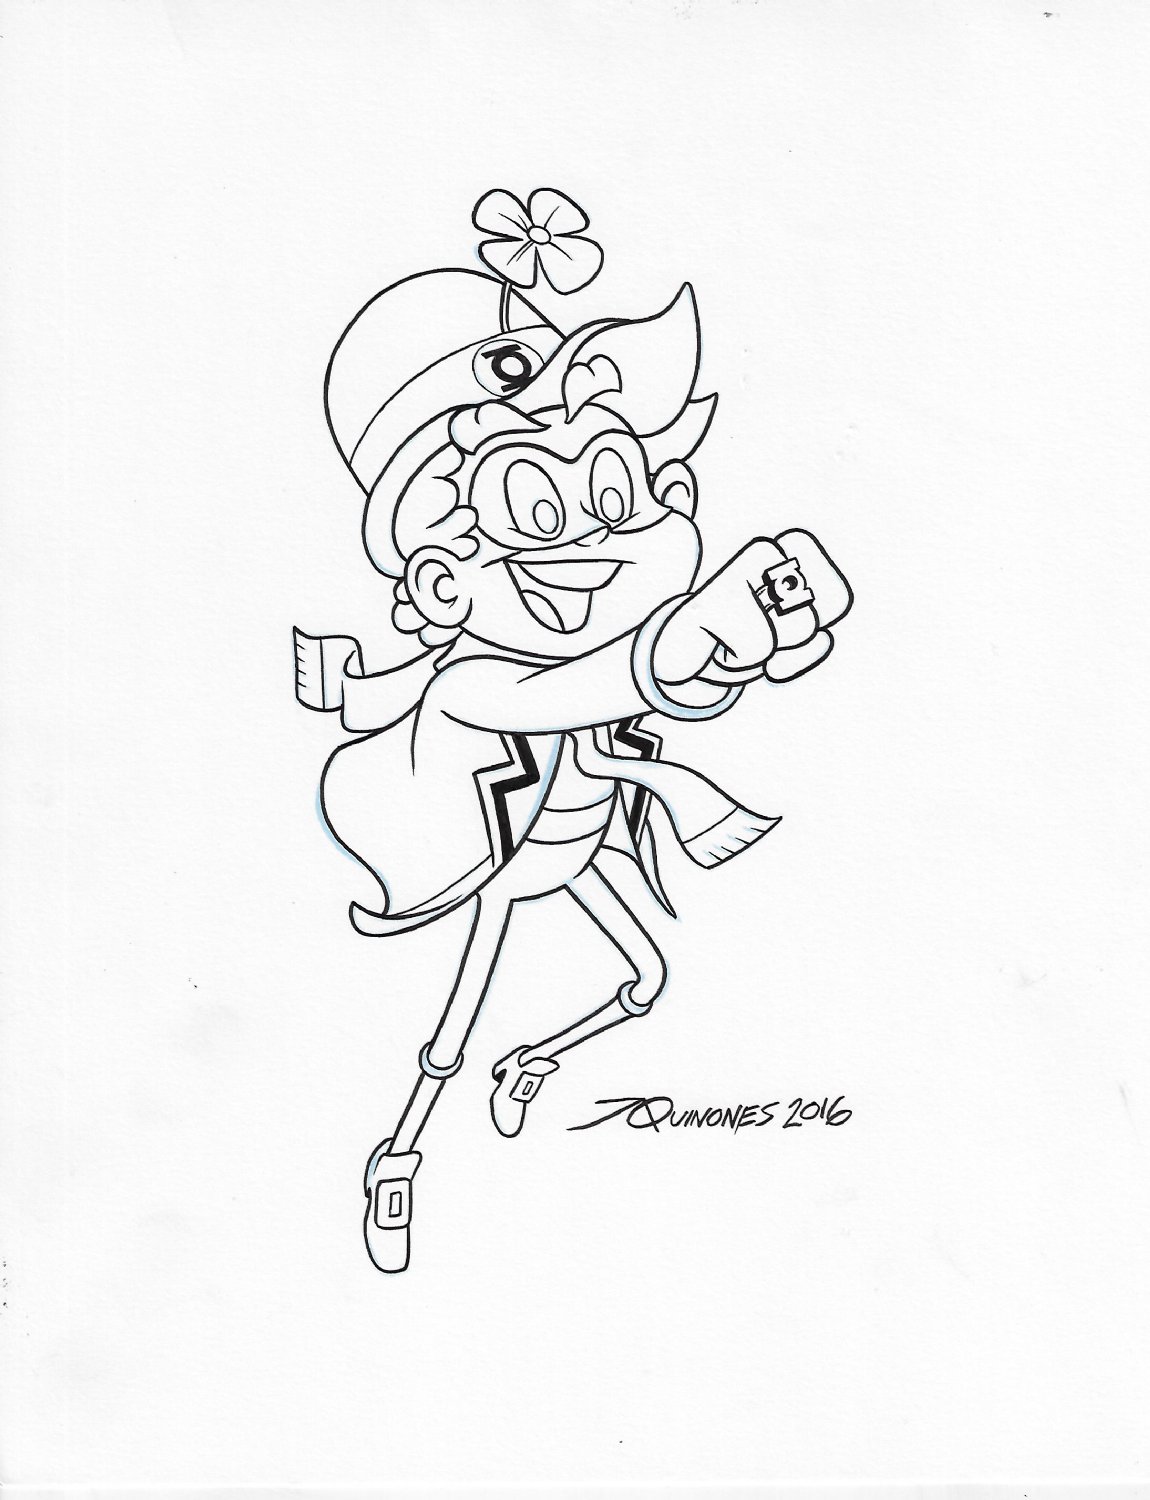 Splash page ic art for sale artwork lucky charms cereal box cover art by artist joe quinones